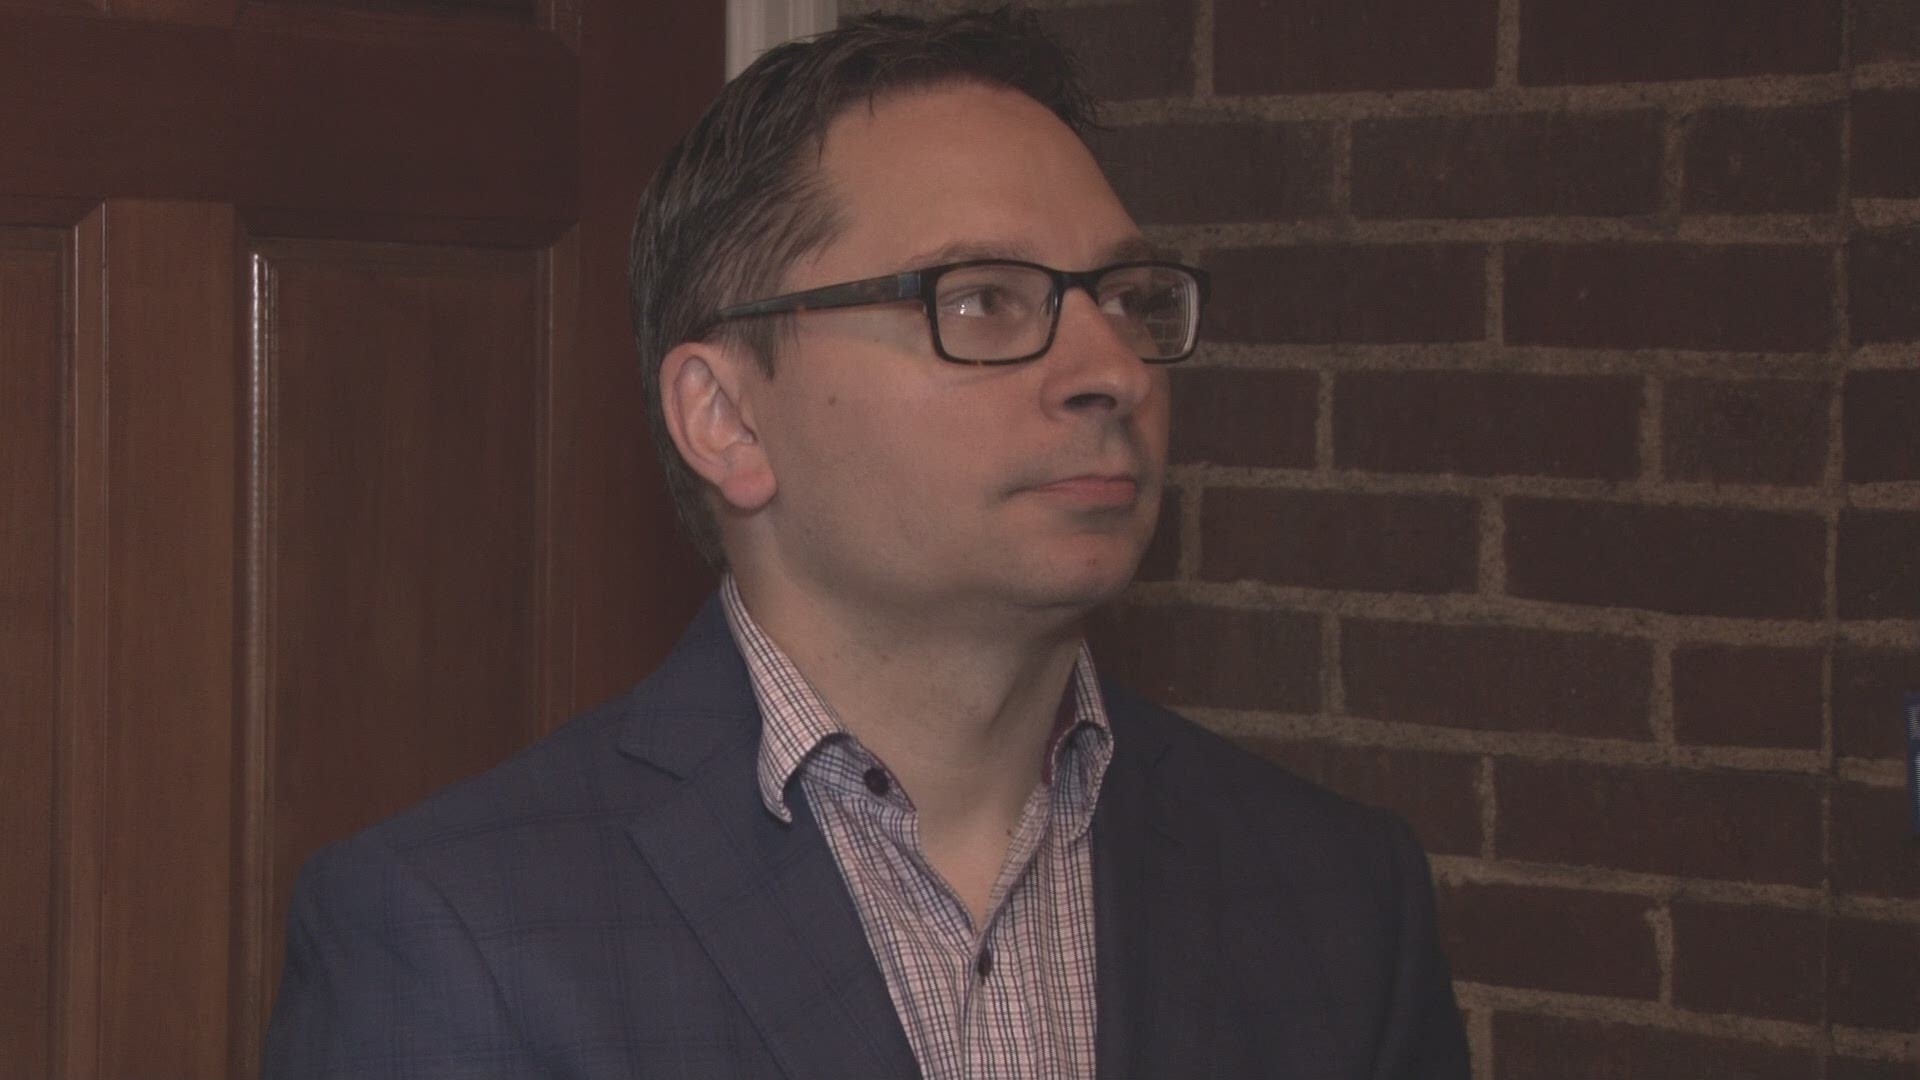 Jon Krawczynski, a sports writer for The Athletic was the first to break the story.  
KARE 11 Sports Director Eric Perkins caught up with him to discuss the details of the debacle.